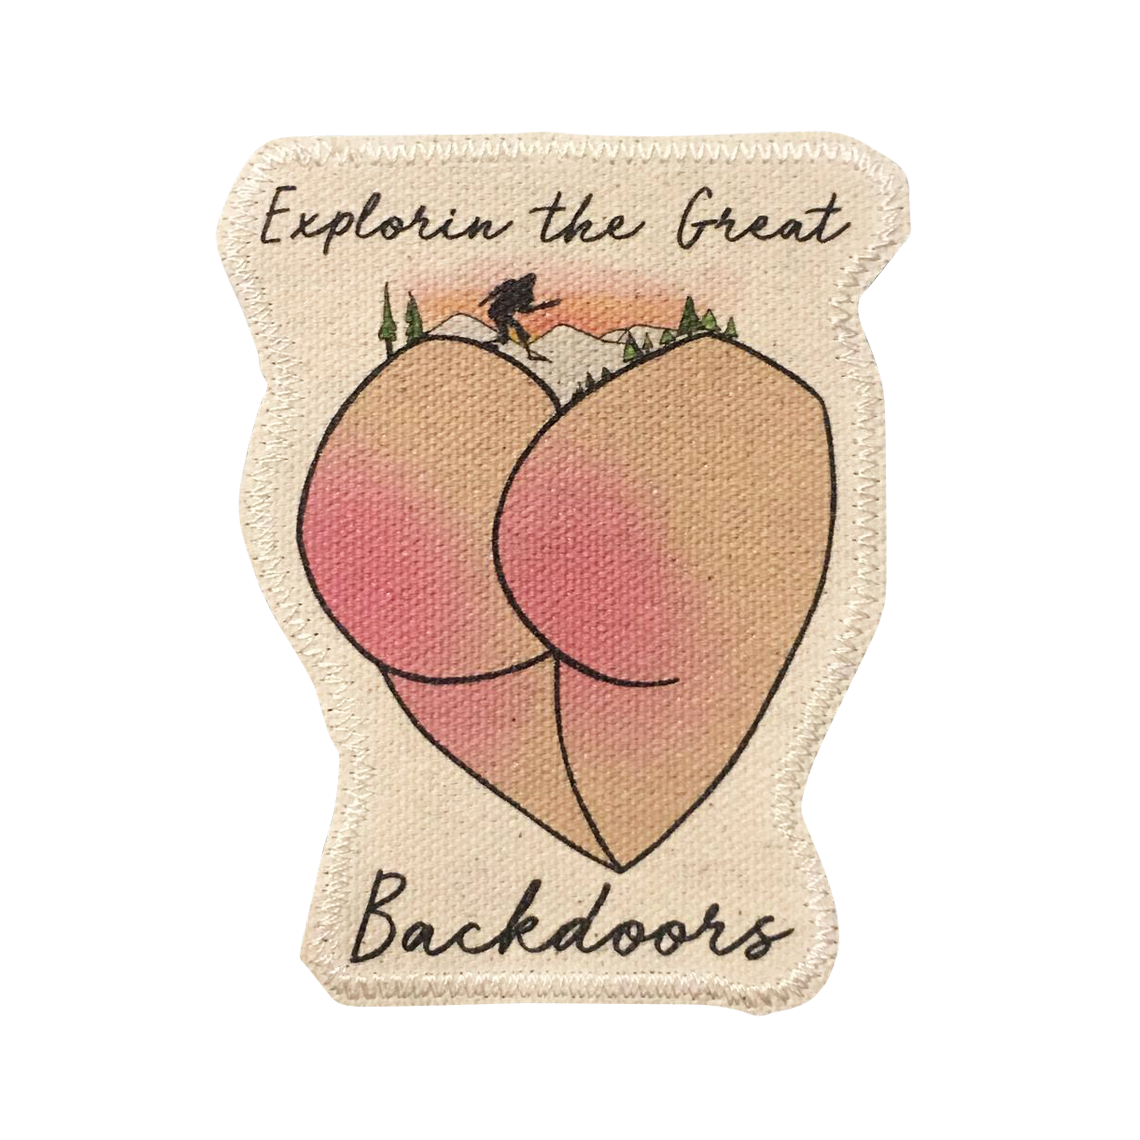 Great Backdoors Patch